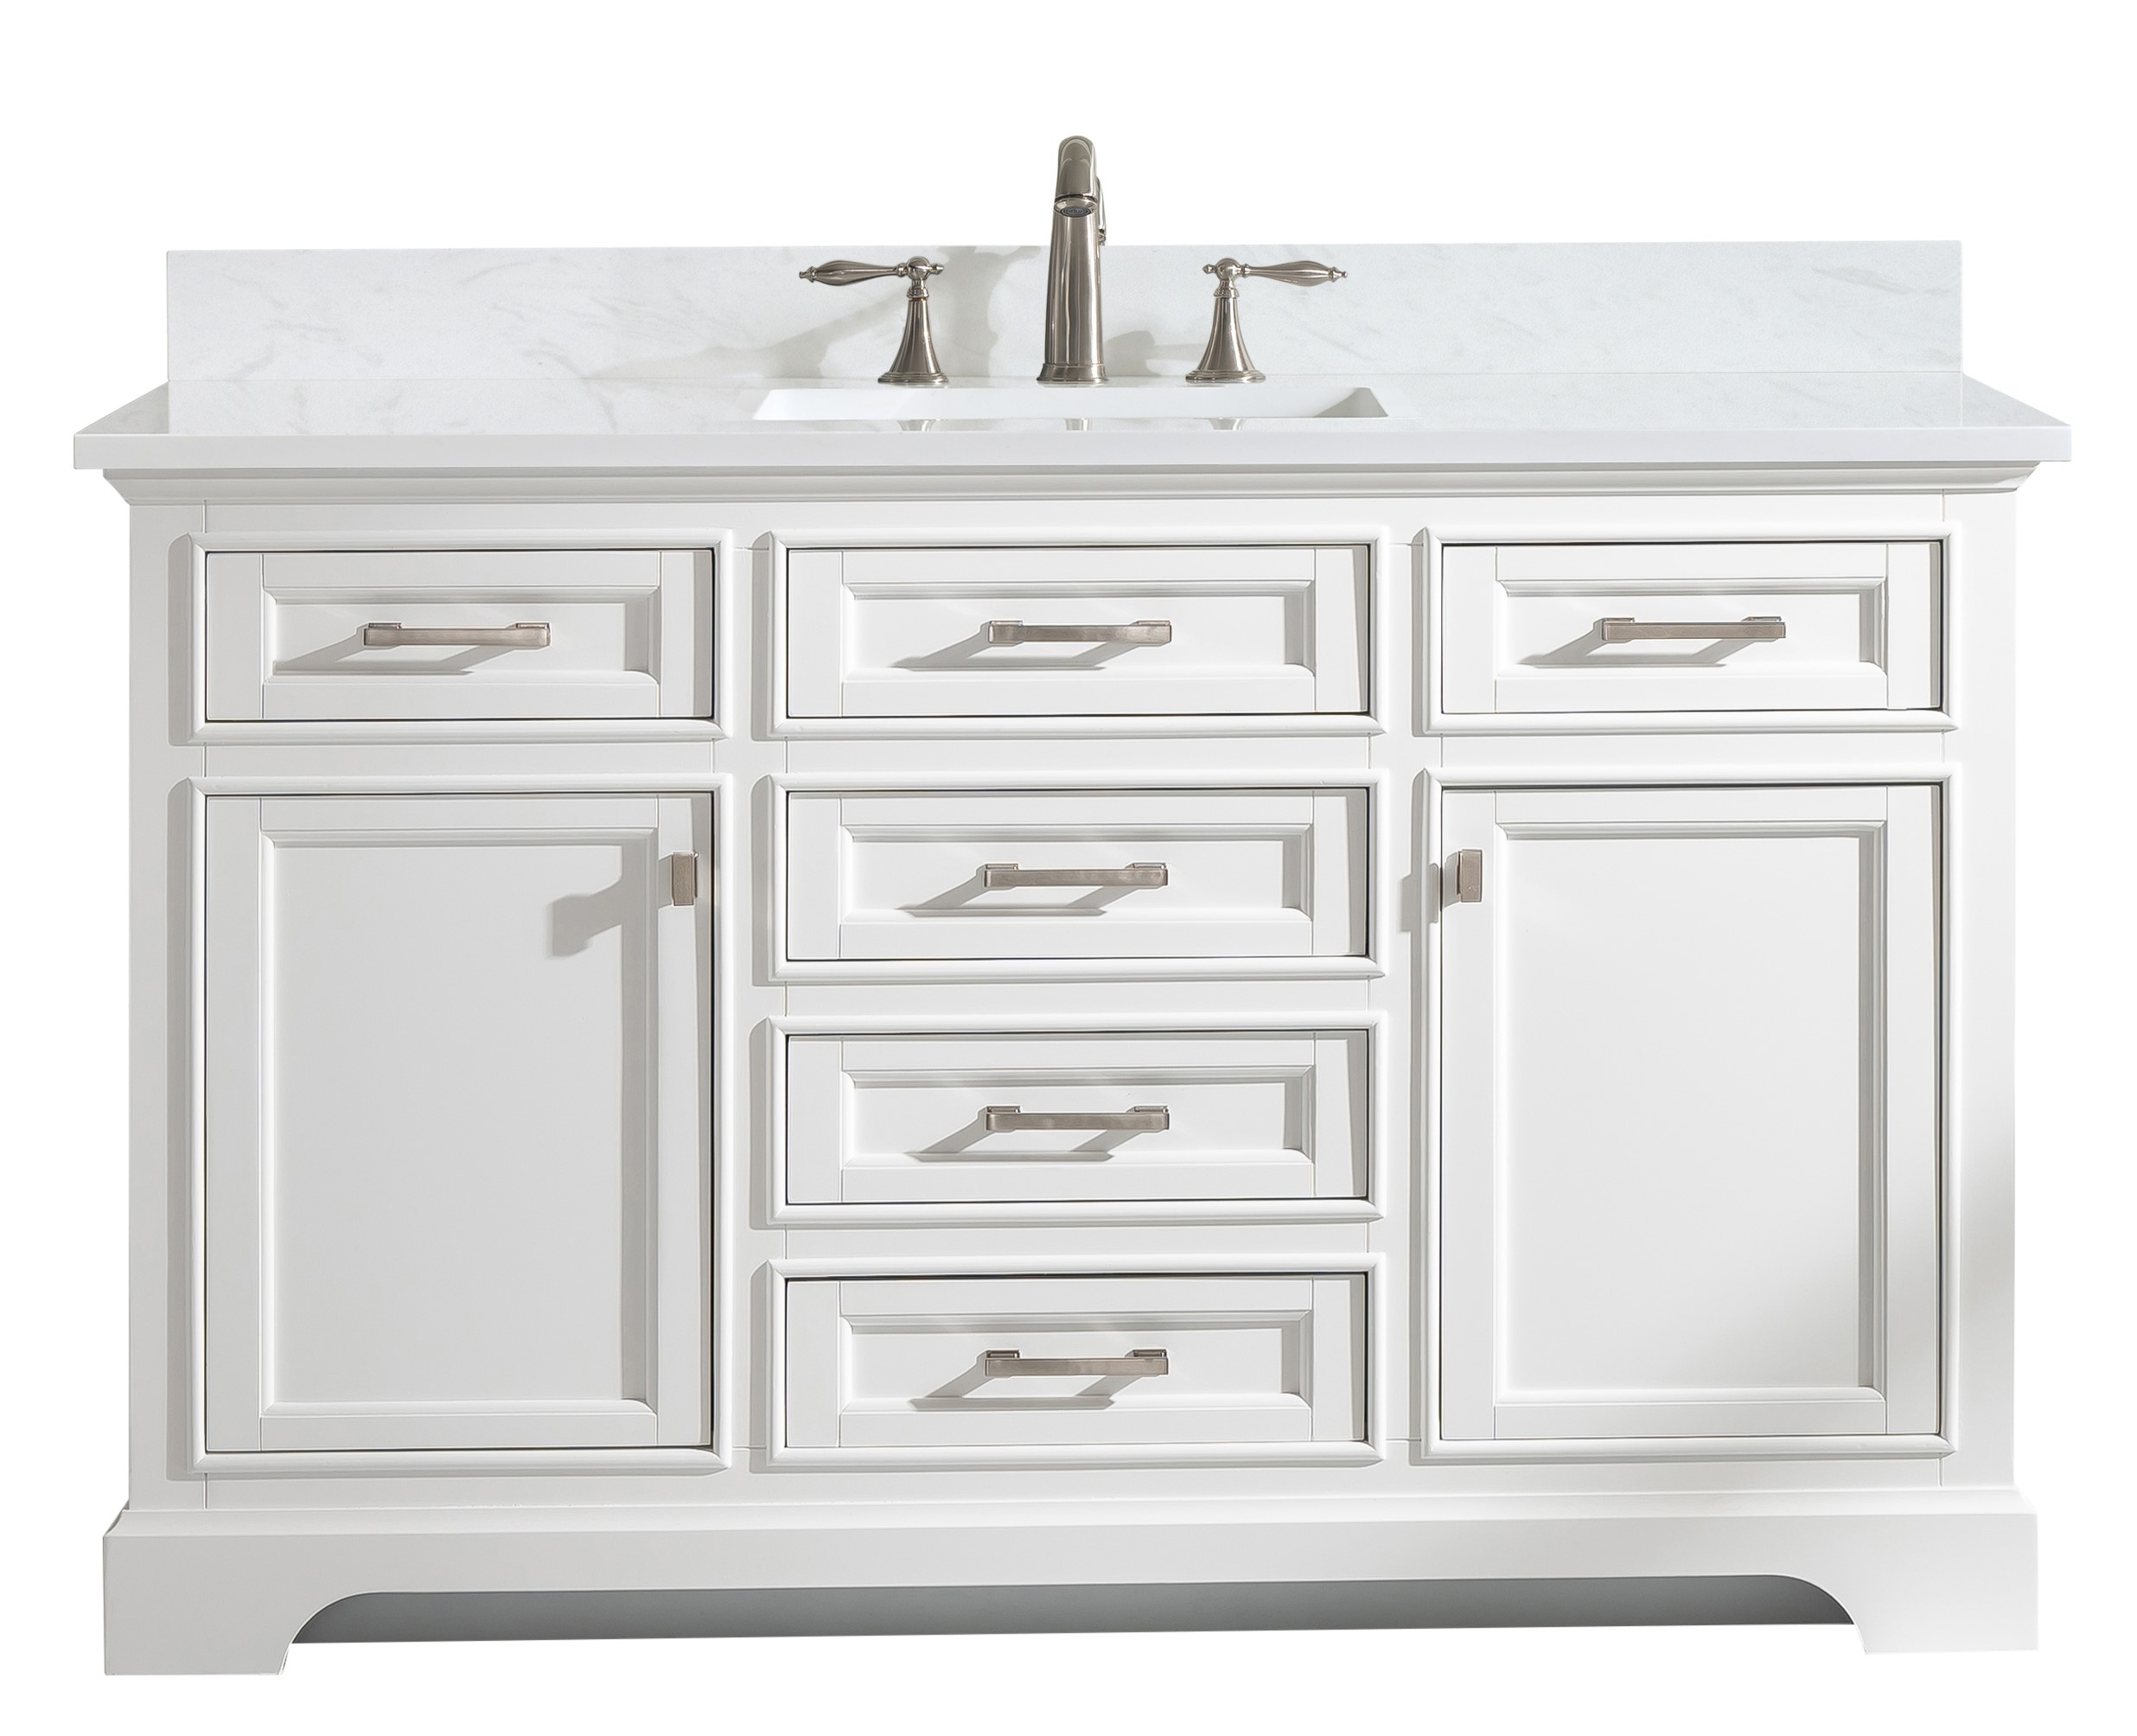 Transitional 54" Single Sink Vanity with 1" Thick White Quartz Countertop in White Finish